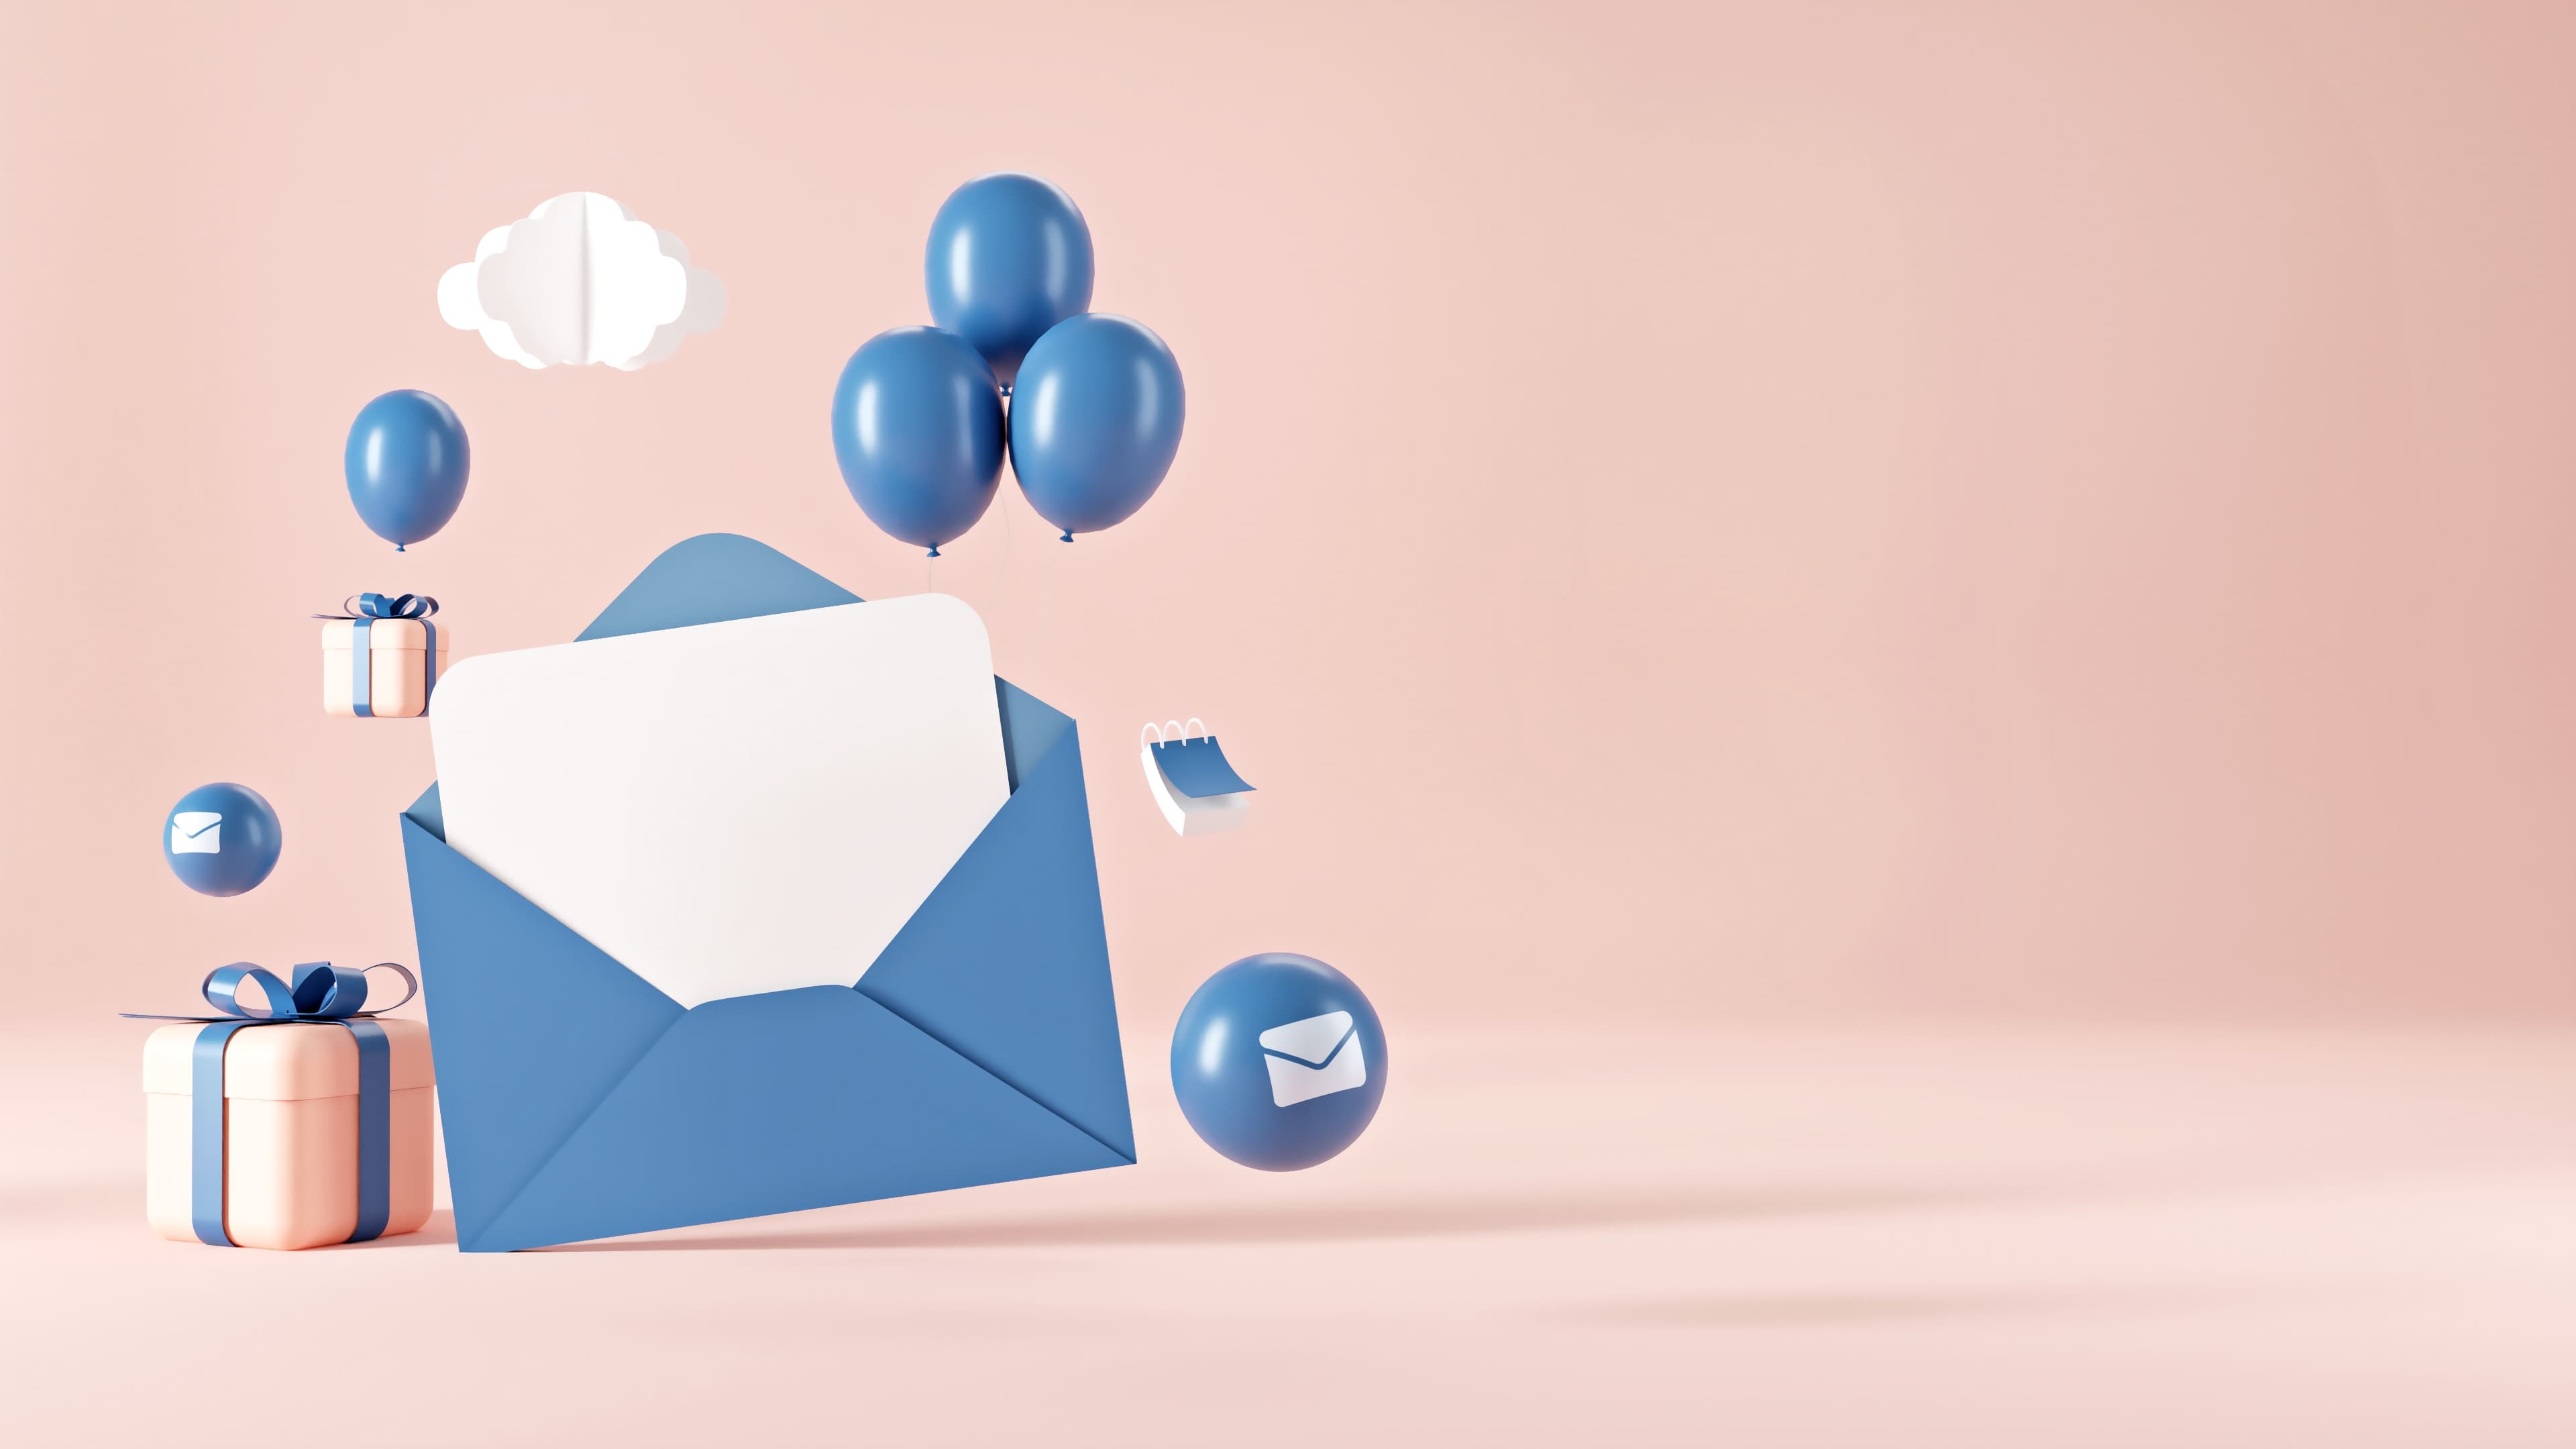 Graphic envelope opened with balloons